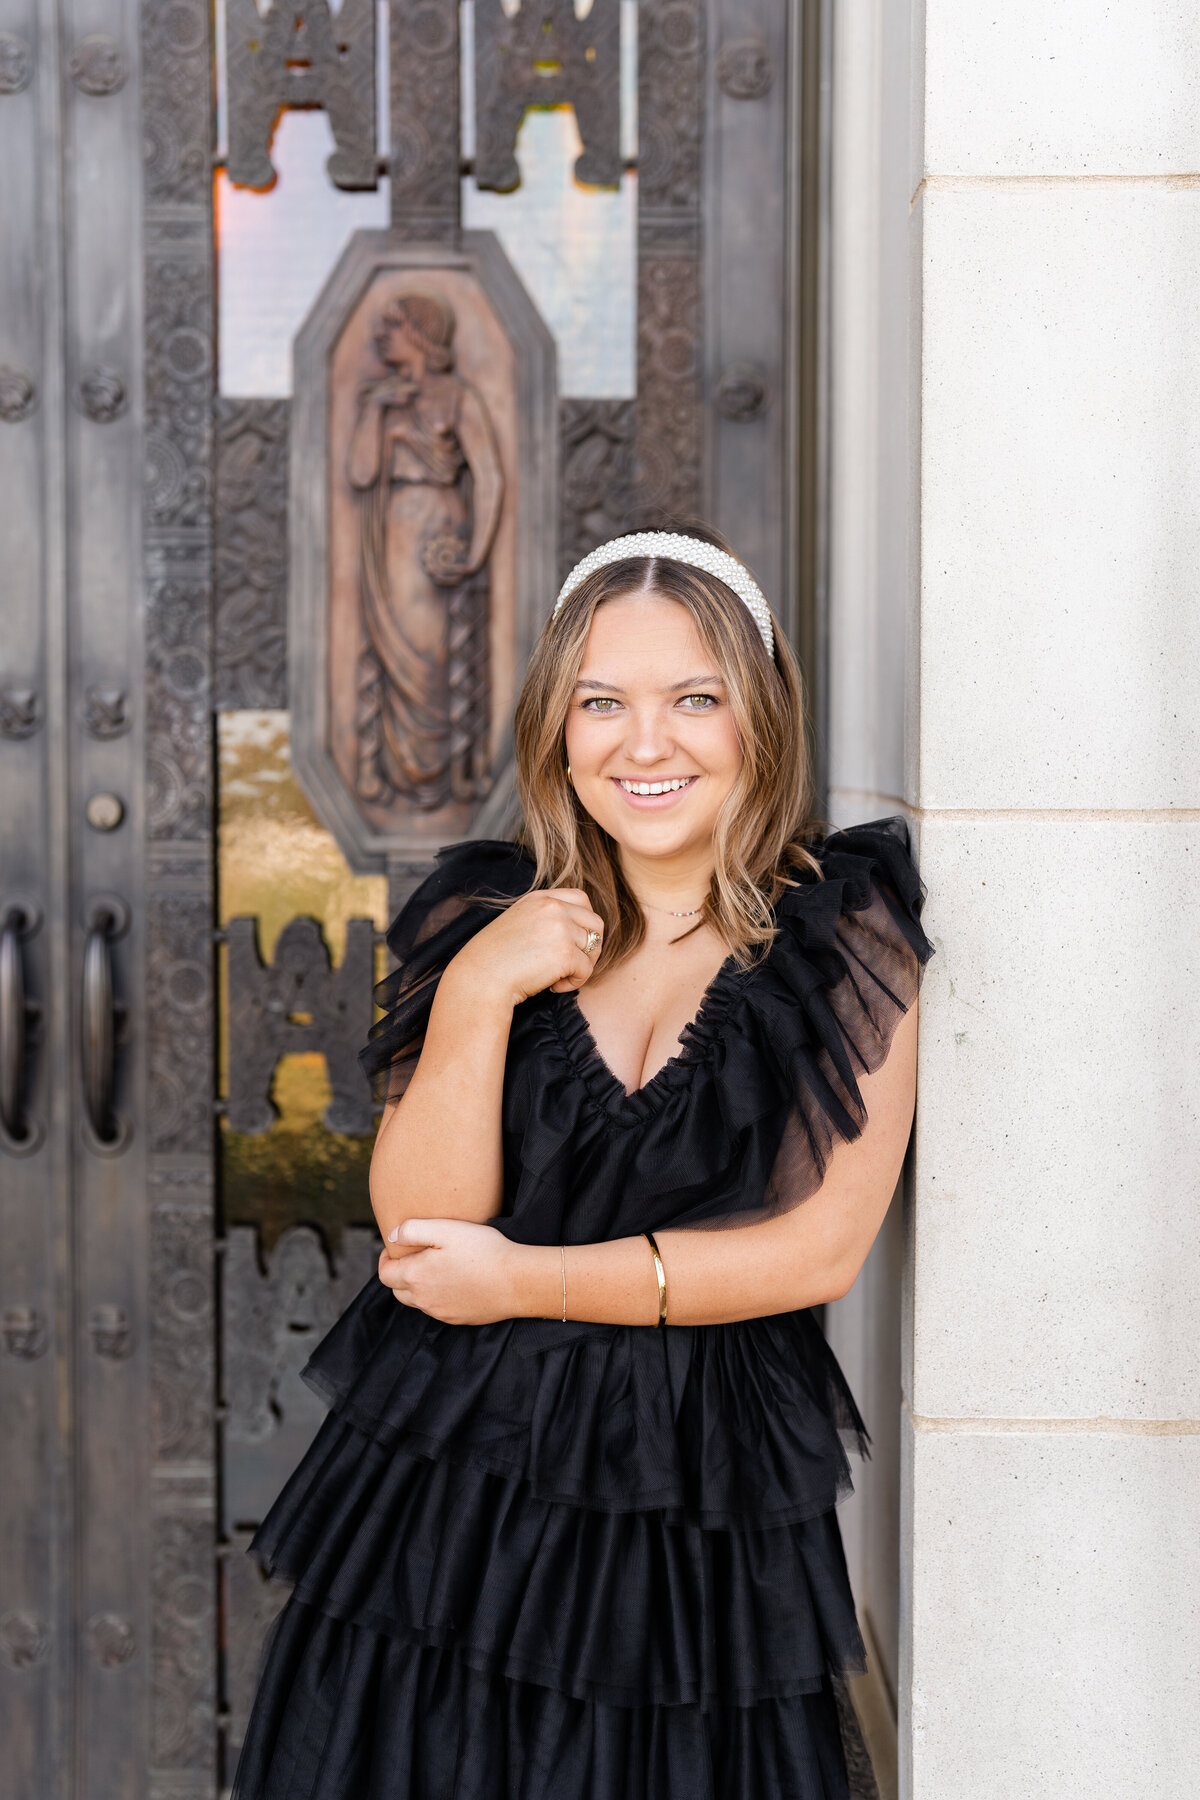 Texas A&M senior girl wearing black fluffy dress while leaning against Administration Building while holding elbow and touching hair wearing pearl headband